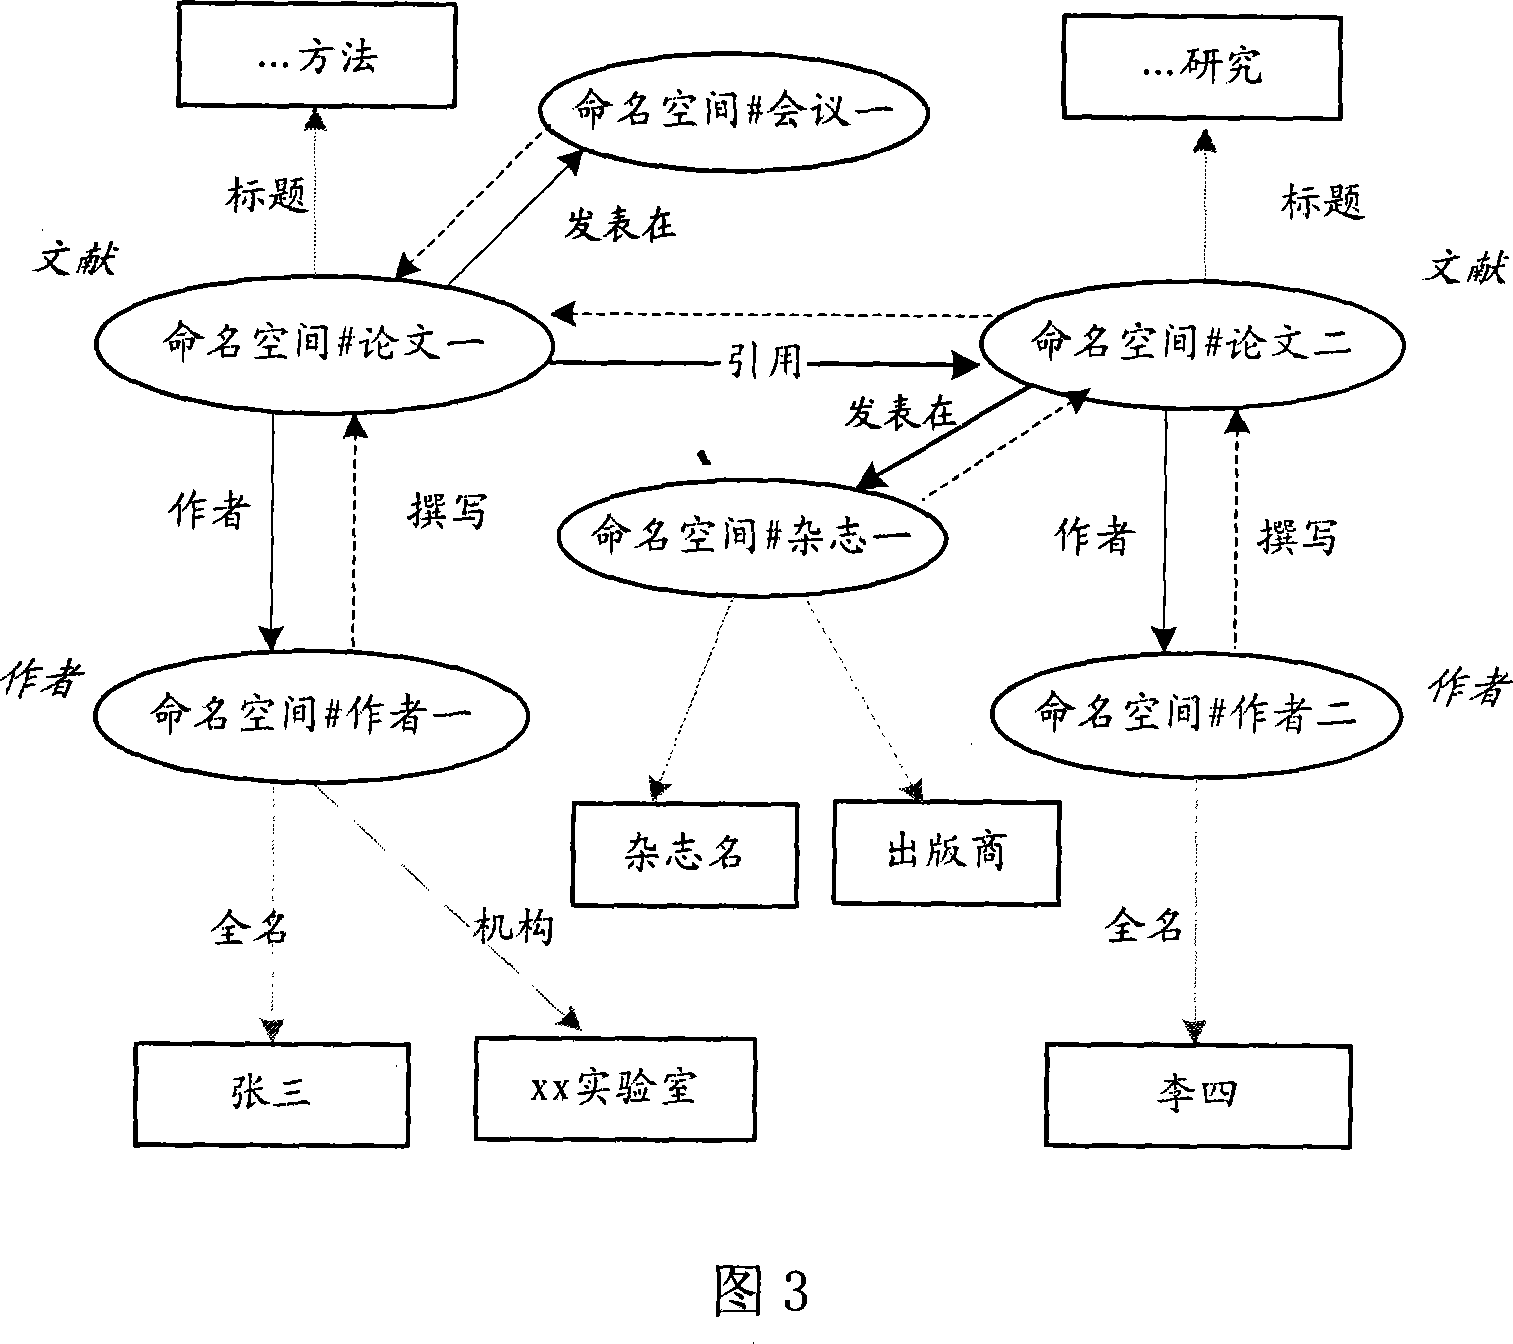 Method for indexing and acquiring semantic net information